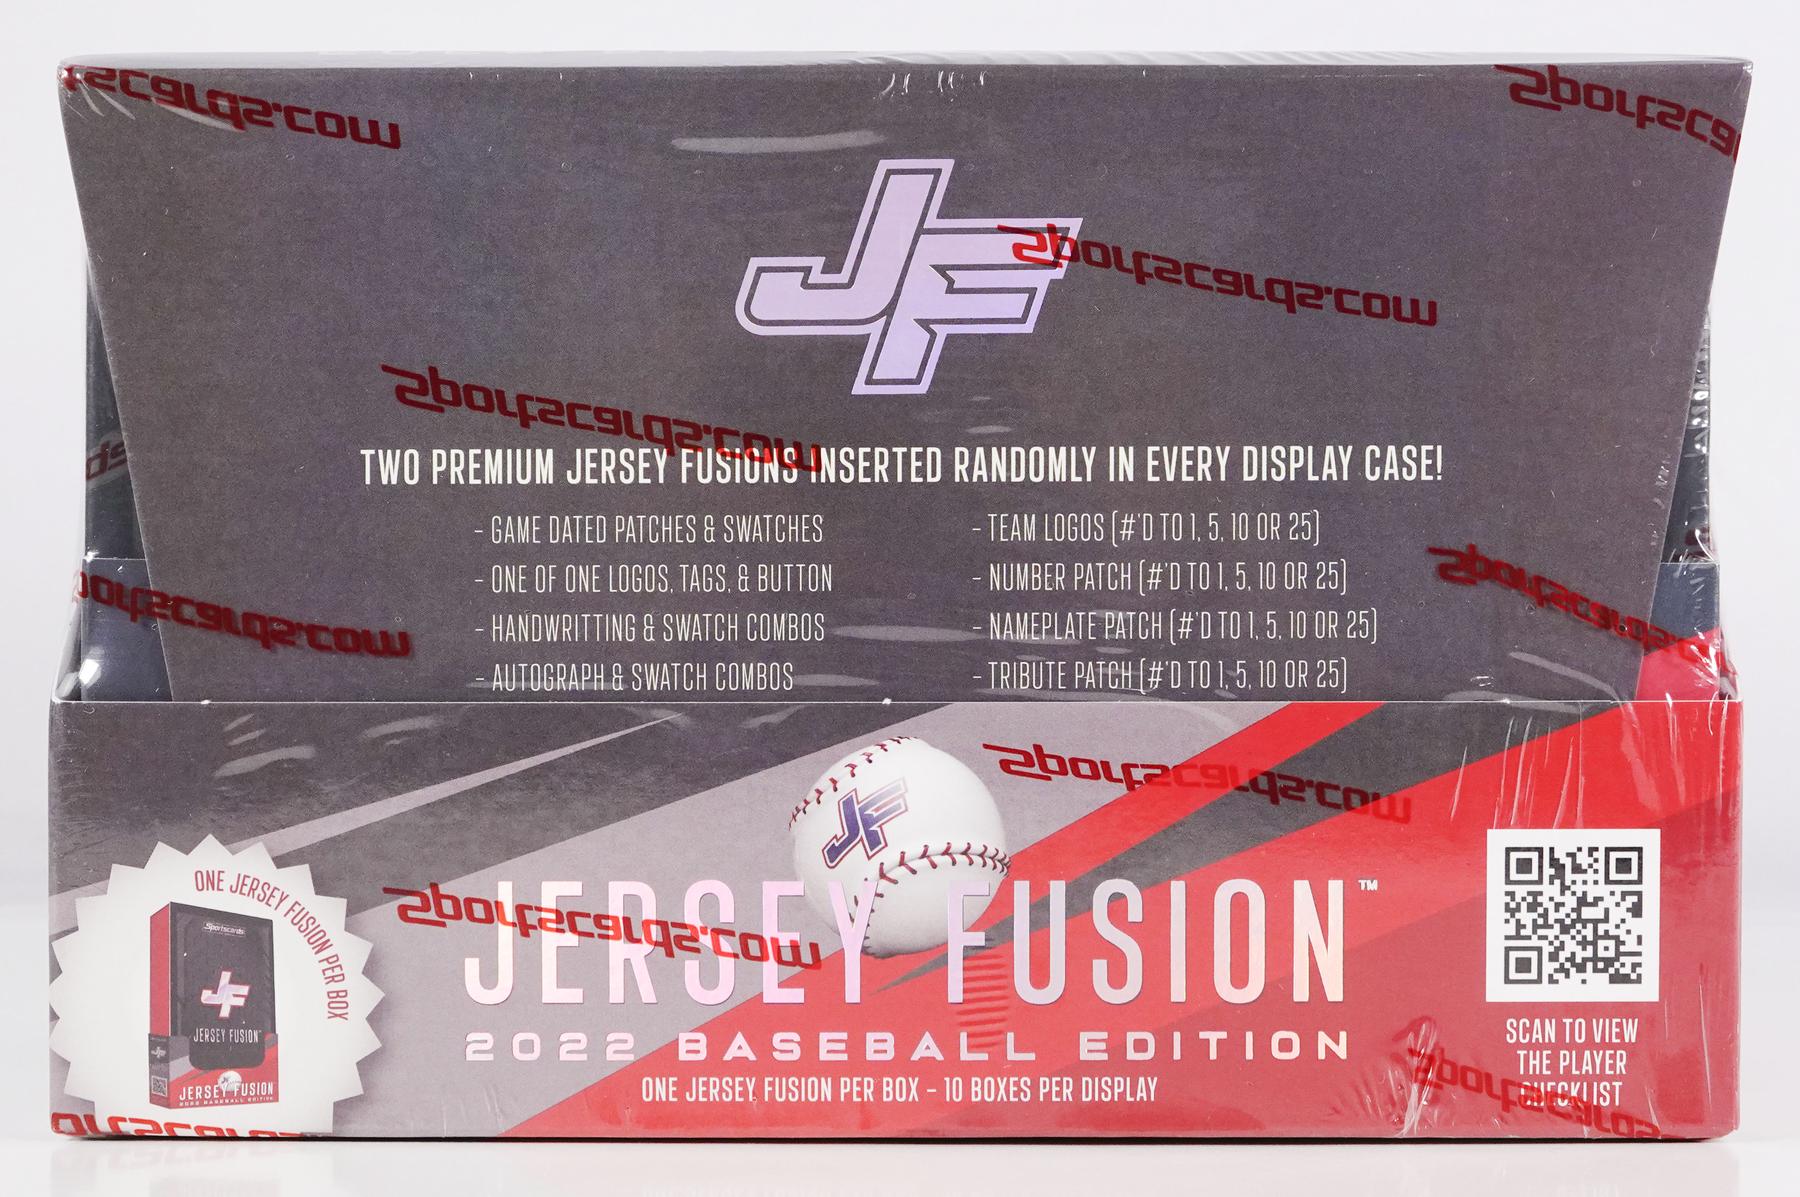 2021 All Sports Jersey Fusion TY COBB Player Used Swatch